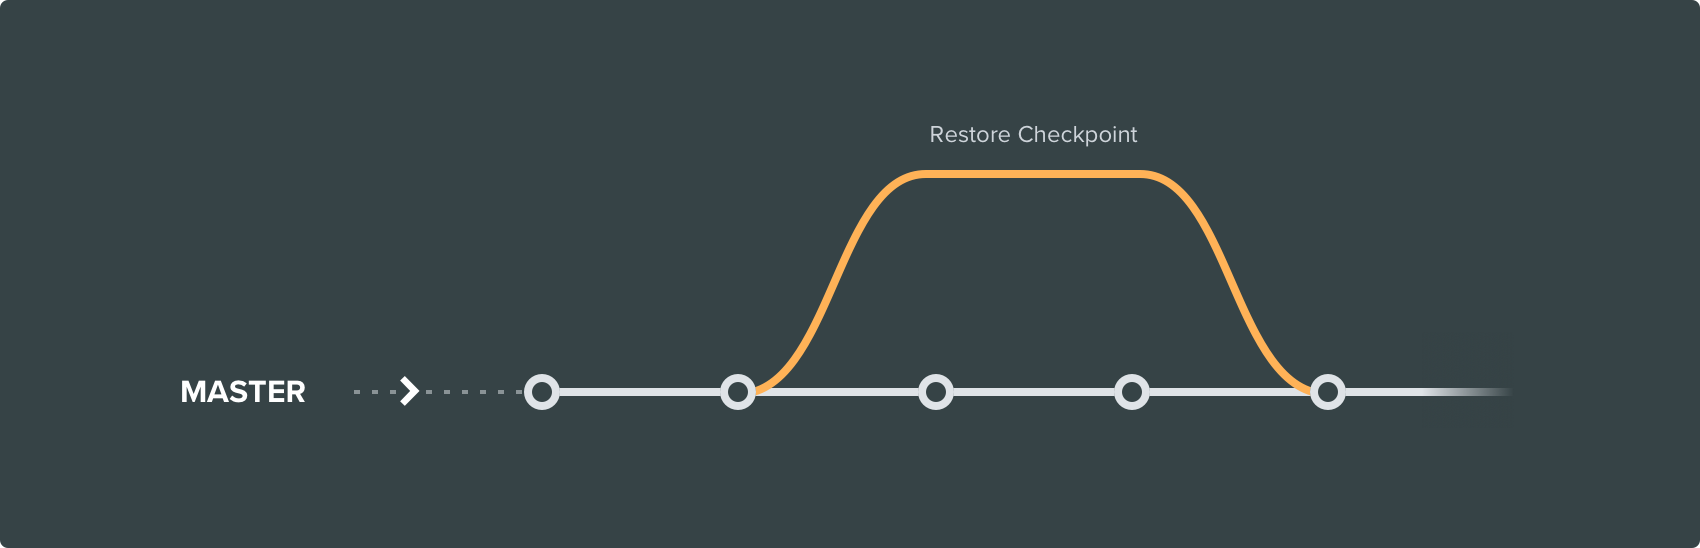 Restore checkpoint applied